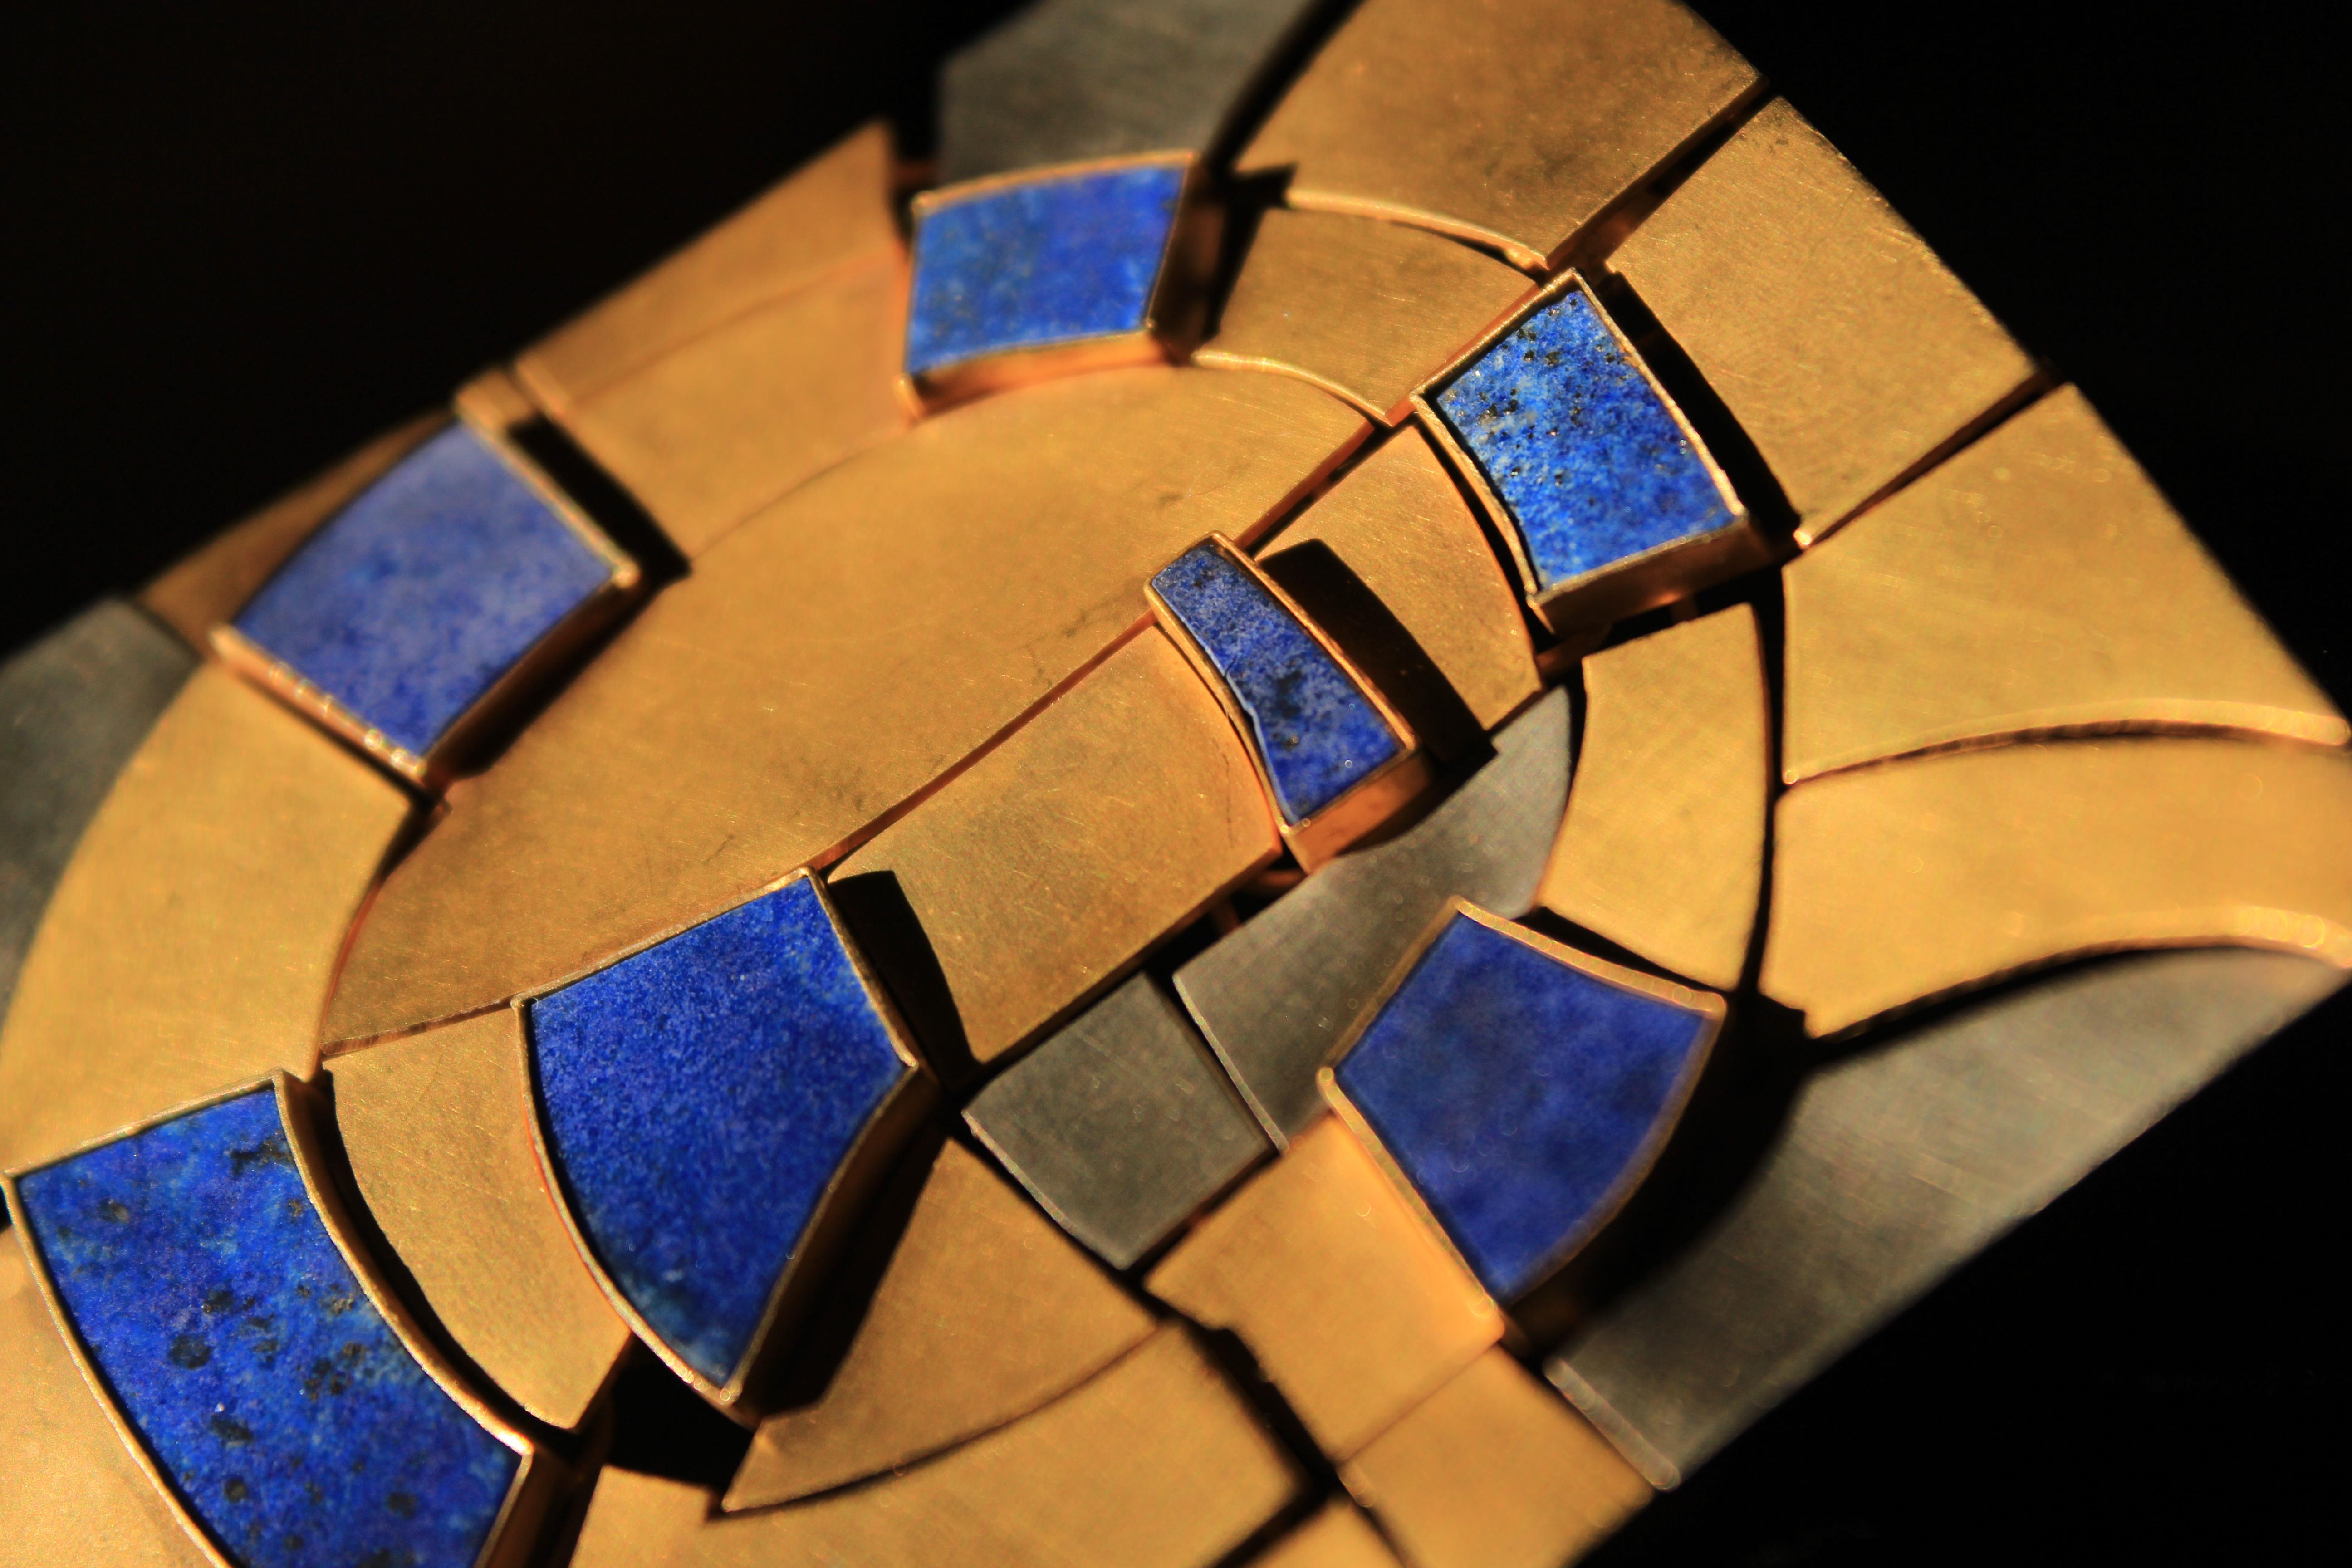 18K Modernist Gold and Lapis Lazuli Brooch Designed by Andre Lamy In Excellent Condition For Sale In Brussels, BE